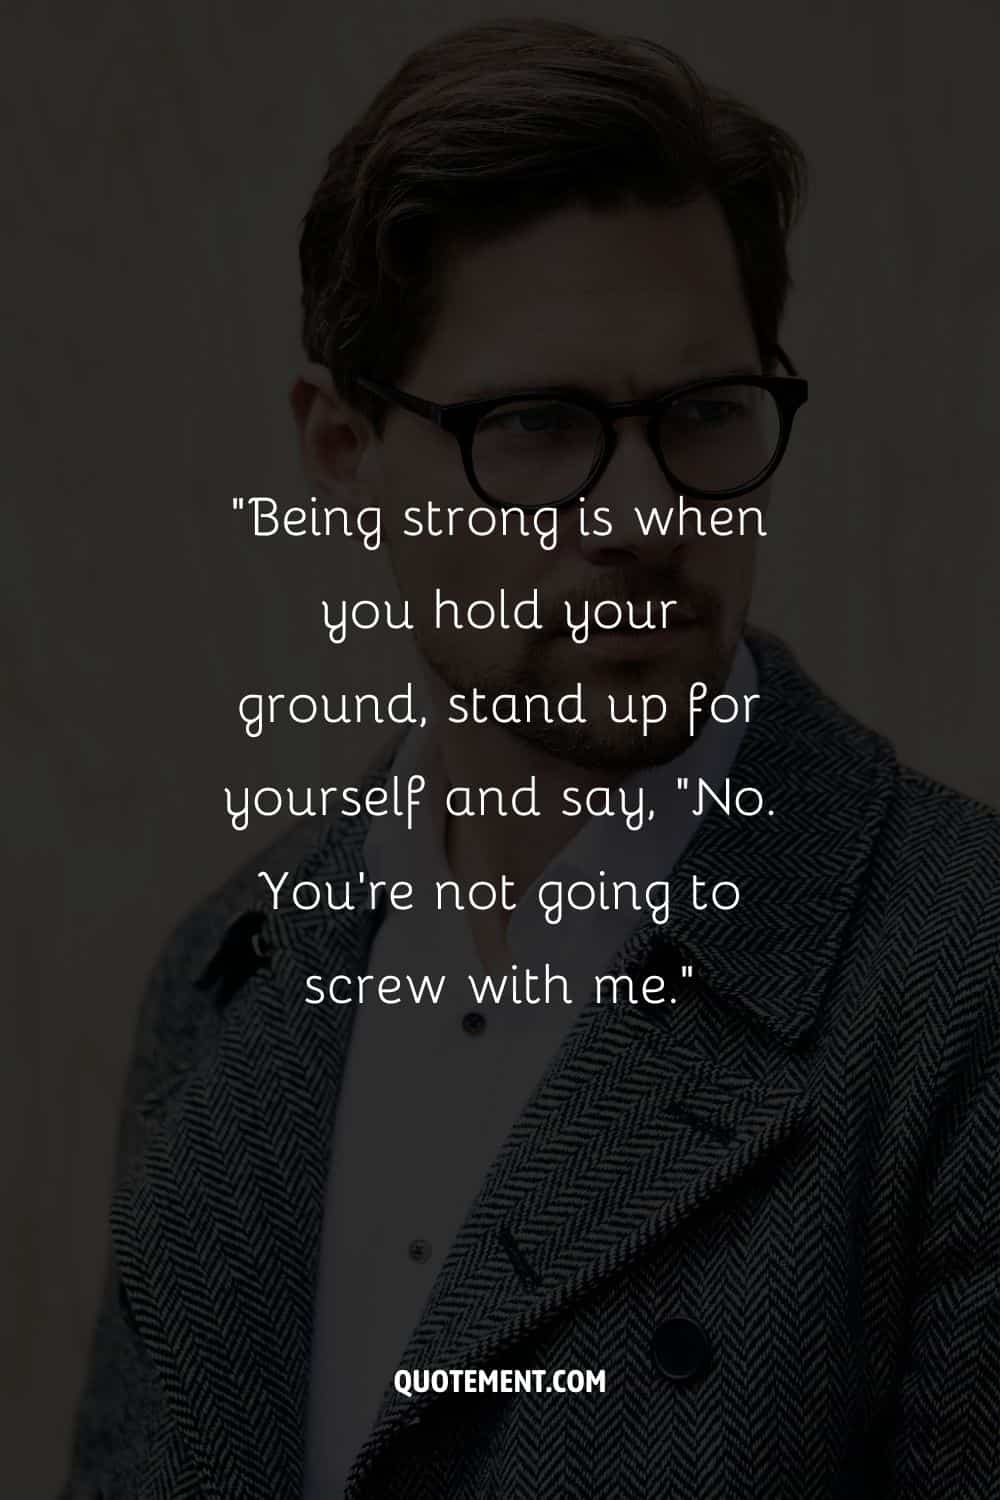 “Being strong is when you hold your ground, stand up for yourself and say, “No. You’re not going to screw with me.”